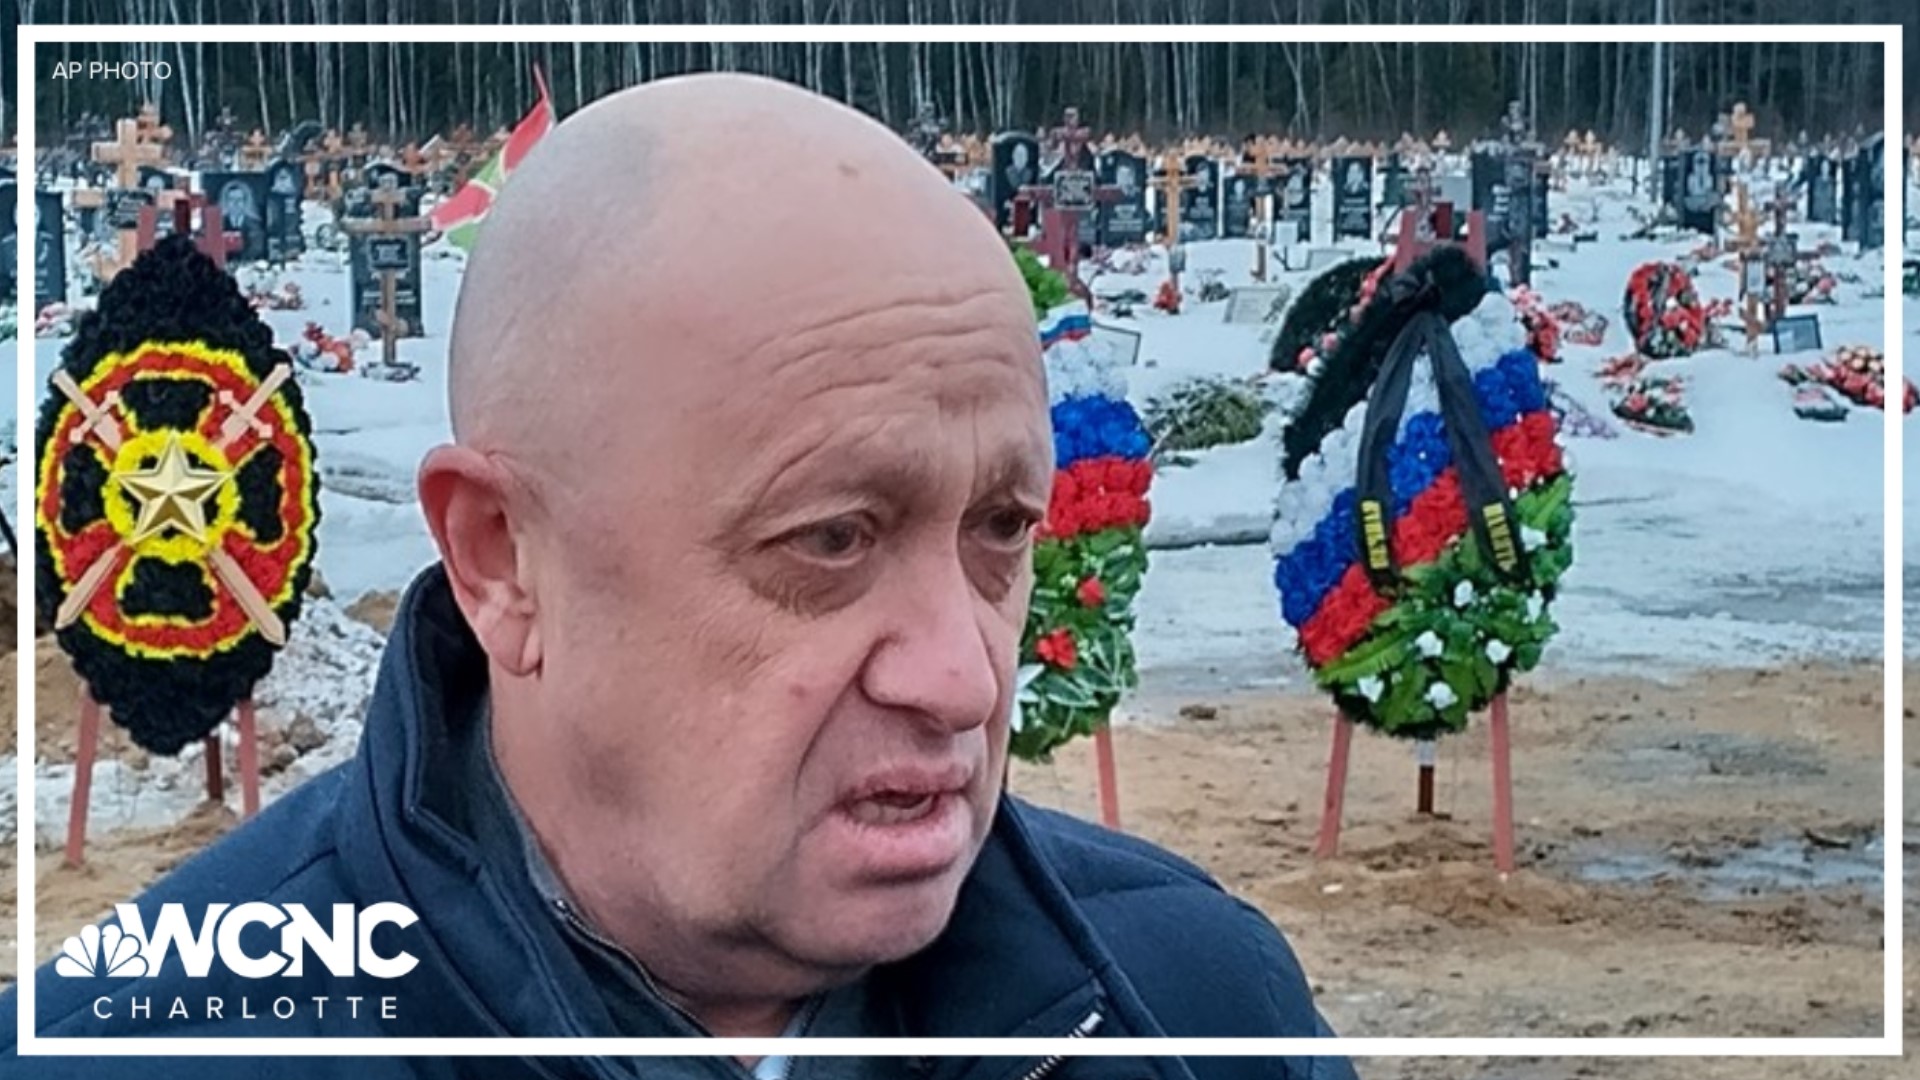 Mercenary chief Yevgeny Prigozhin was listed as a passenger on the plane, but it's unclear if he was onboard the aircraft. Everybody on the flight was killed.